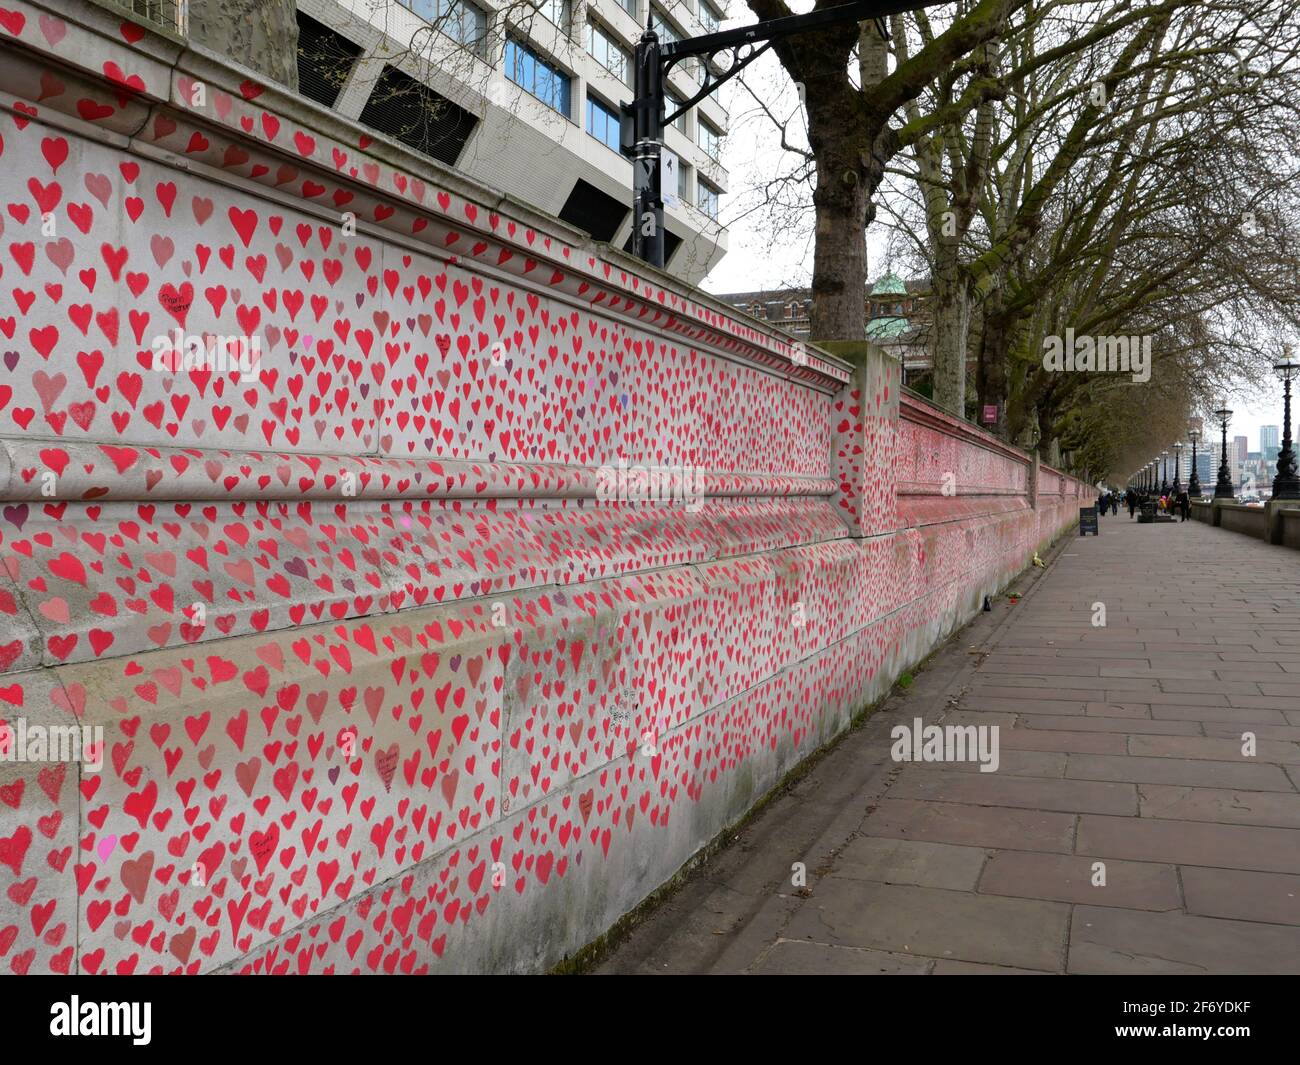 150000 hearts painted in London to represent lives lost to Covid 19 across the UK .Each heart represents someone who was loved and was lost too soon to Covid - 19 . Matt Fowler , co Founder said when they started painting the hearts .Labour leader Keir Starmer arrived and showed support . Hopefully the council will seal the hearts once they are finished so it can become a permanent memorial for those who lost there lives and hopefully  a public enquiry can take place to investigate the failings of the Tory Government in order to learn lessons quickly  and prevent further loss of life ... Stock Photo